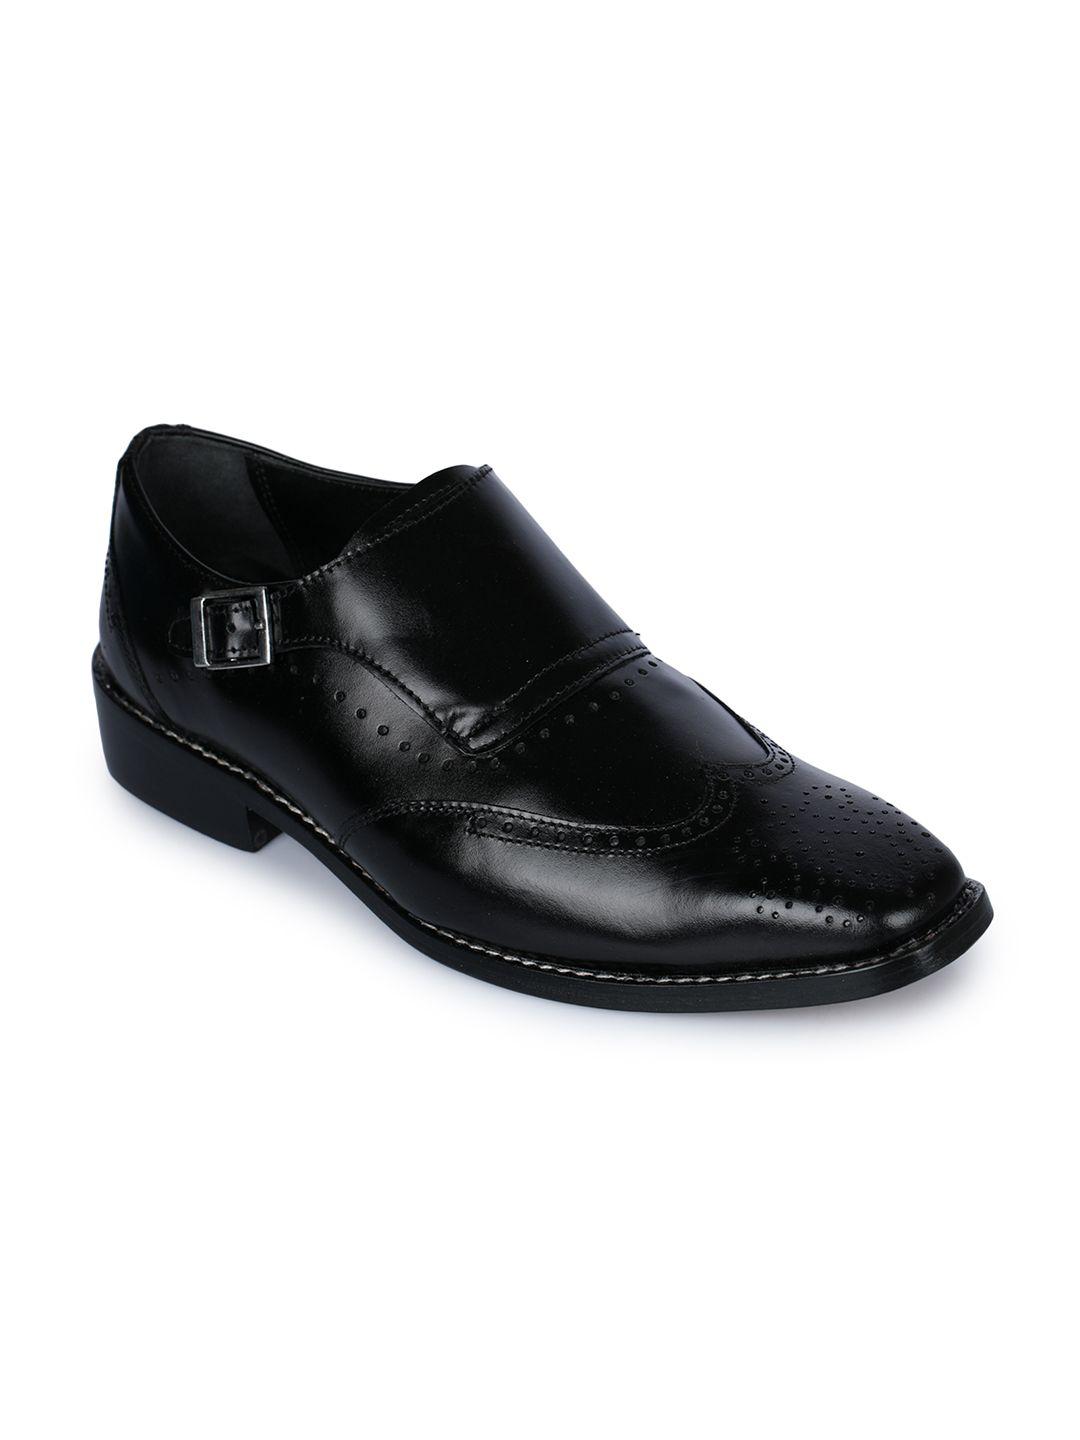 liberty-men-black-solid-leather-formal-monk-shoes